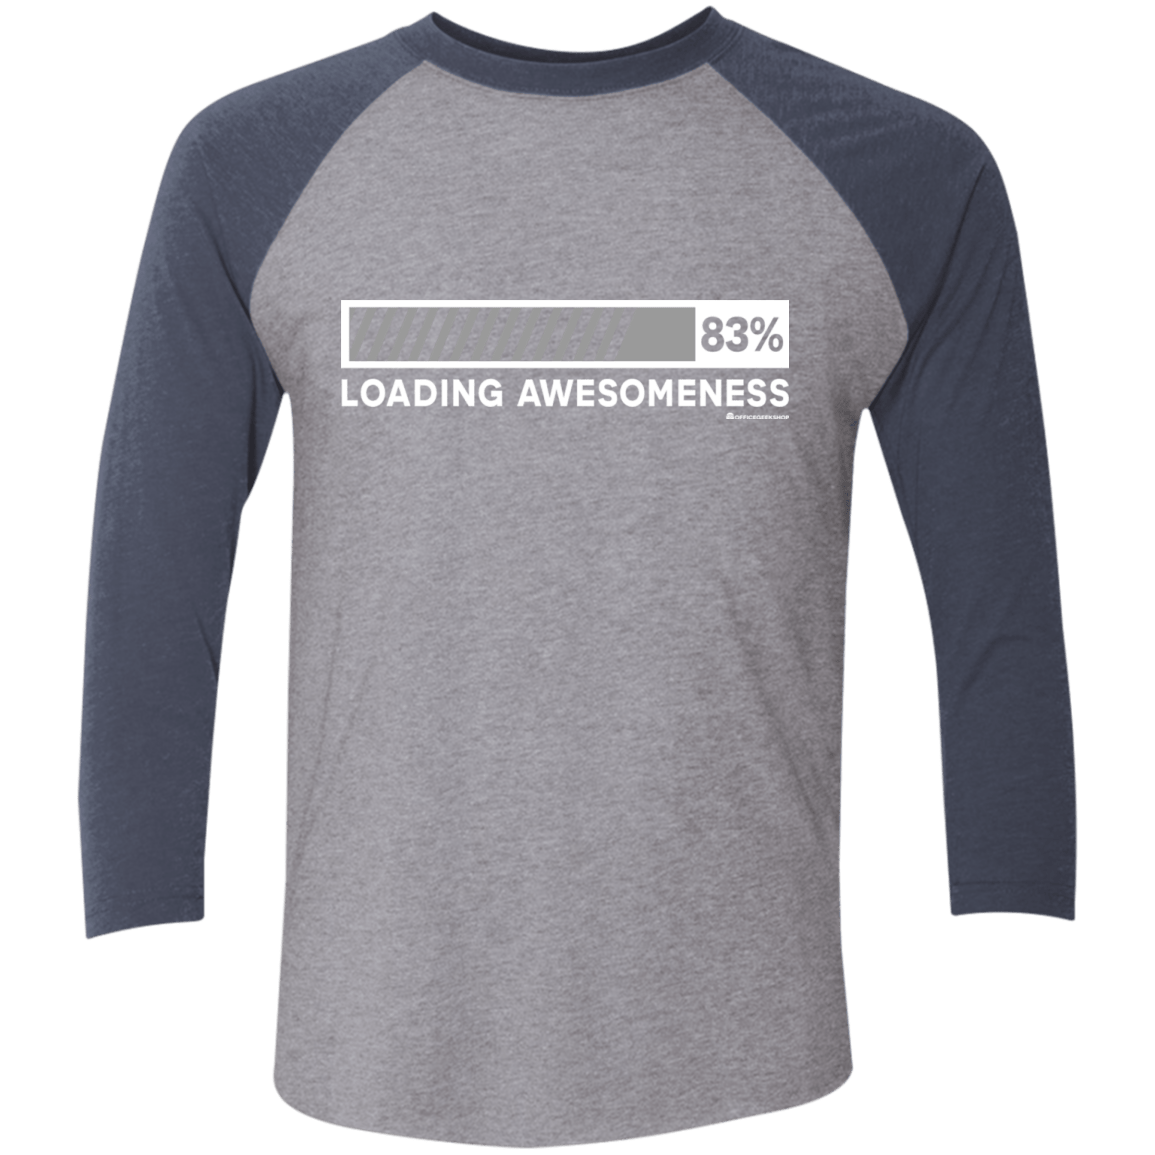 T-Shirts Premium Heather/Vintage Navy / X-Small Loading Awesomeness Men's Triblend 3/4 Sleeve